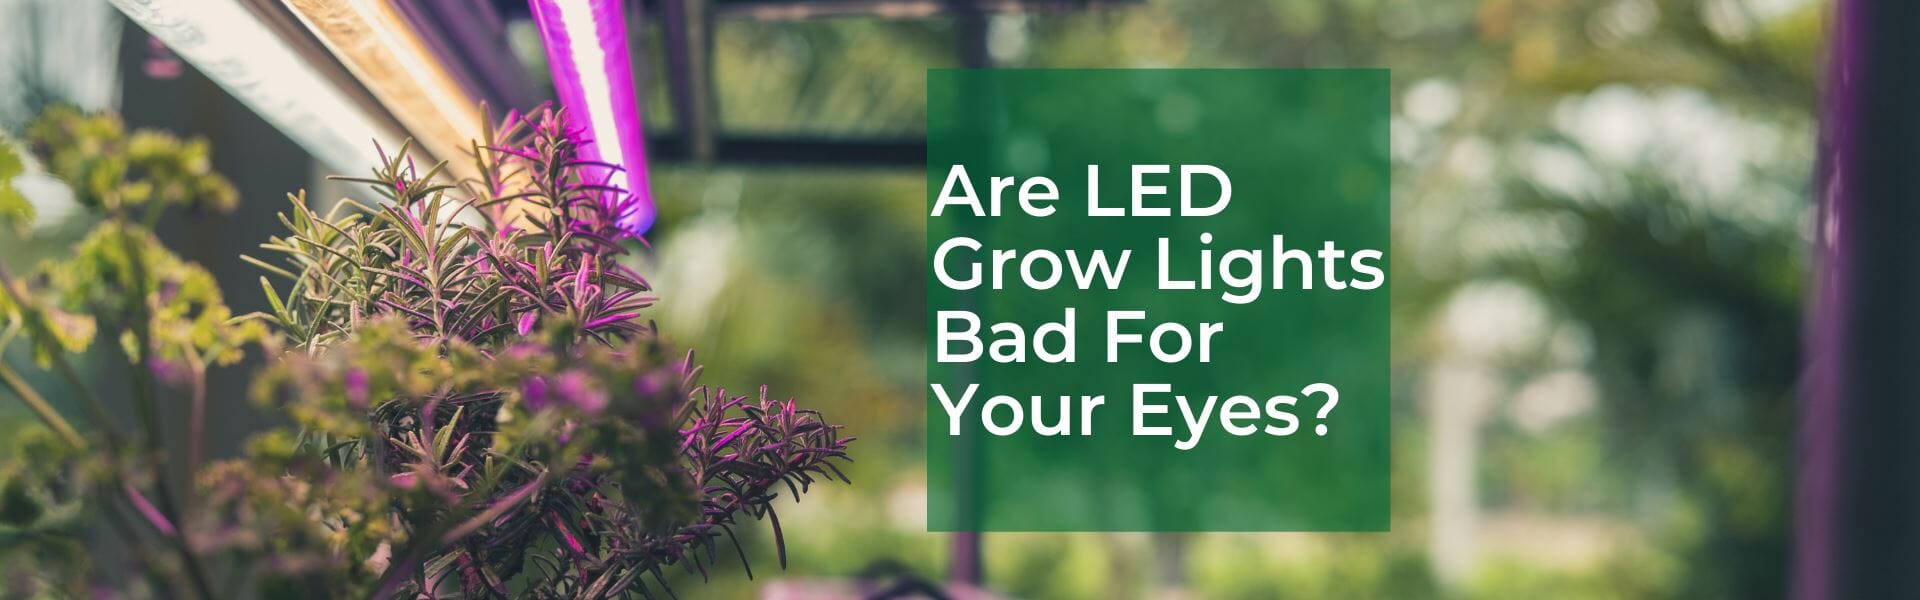 Are LED Lights Bad For Your Eyes?